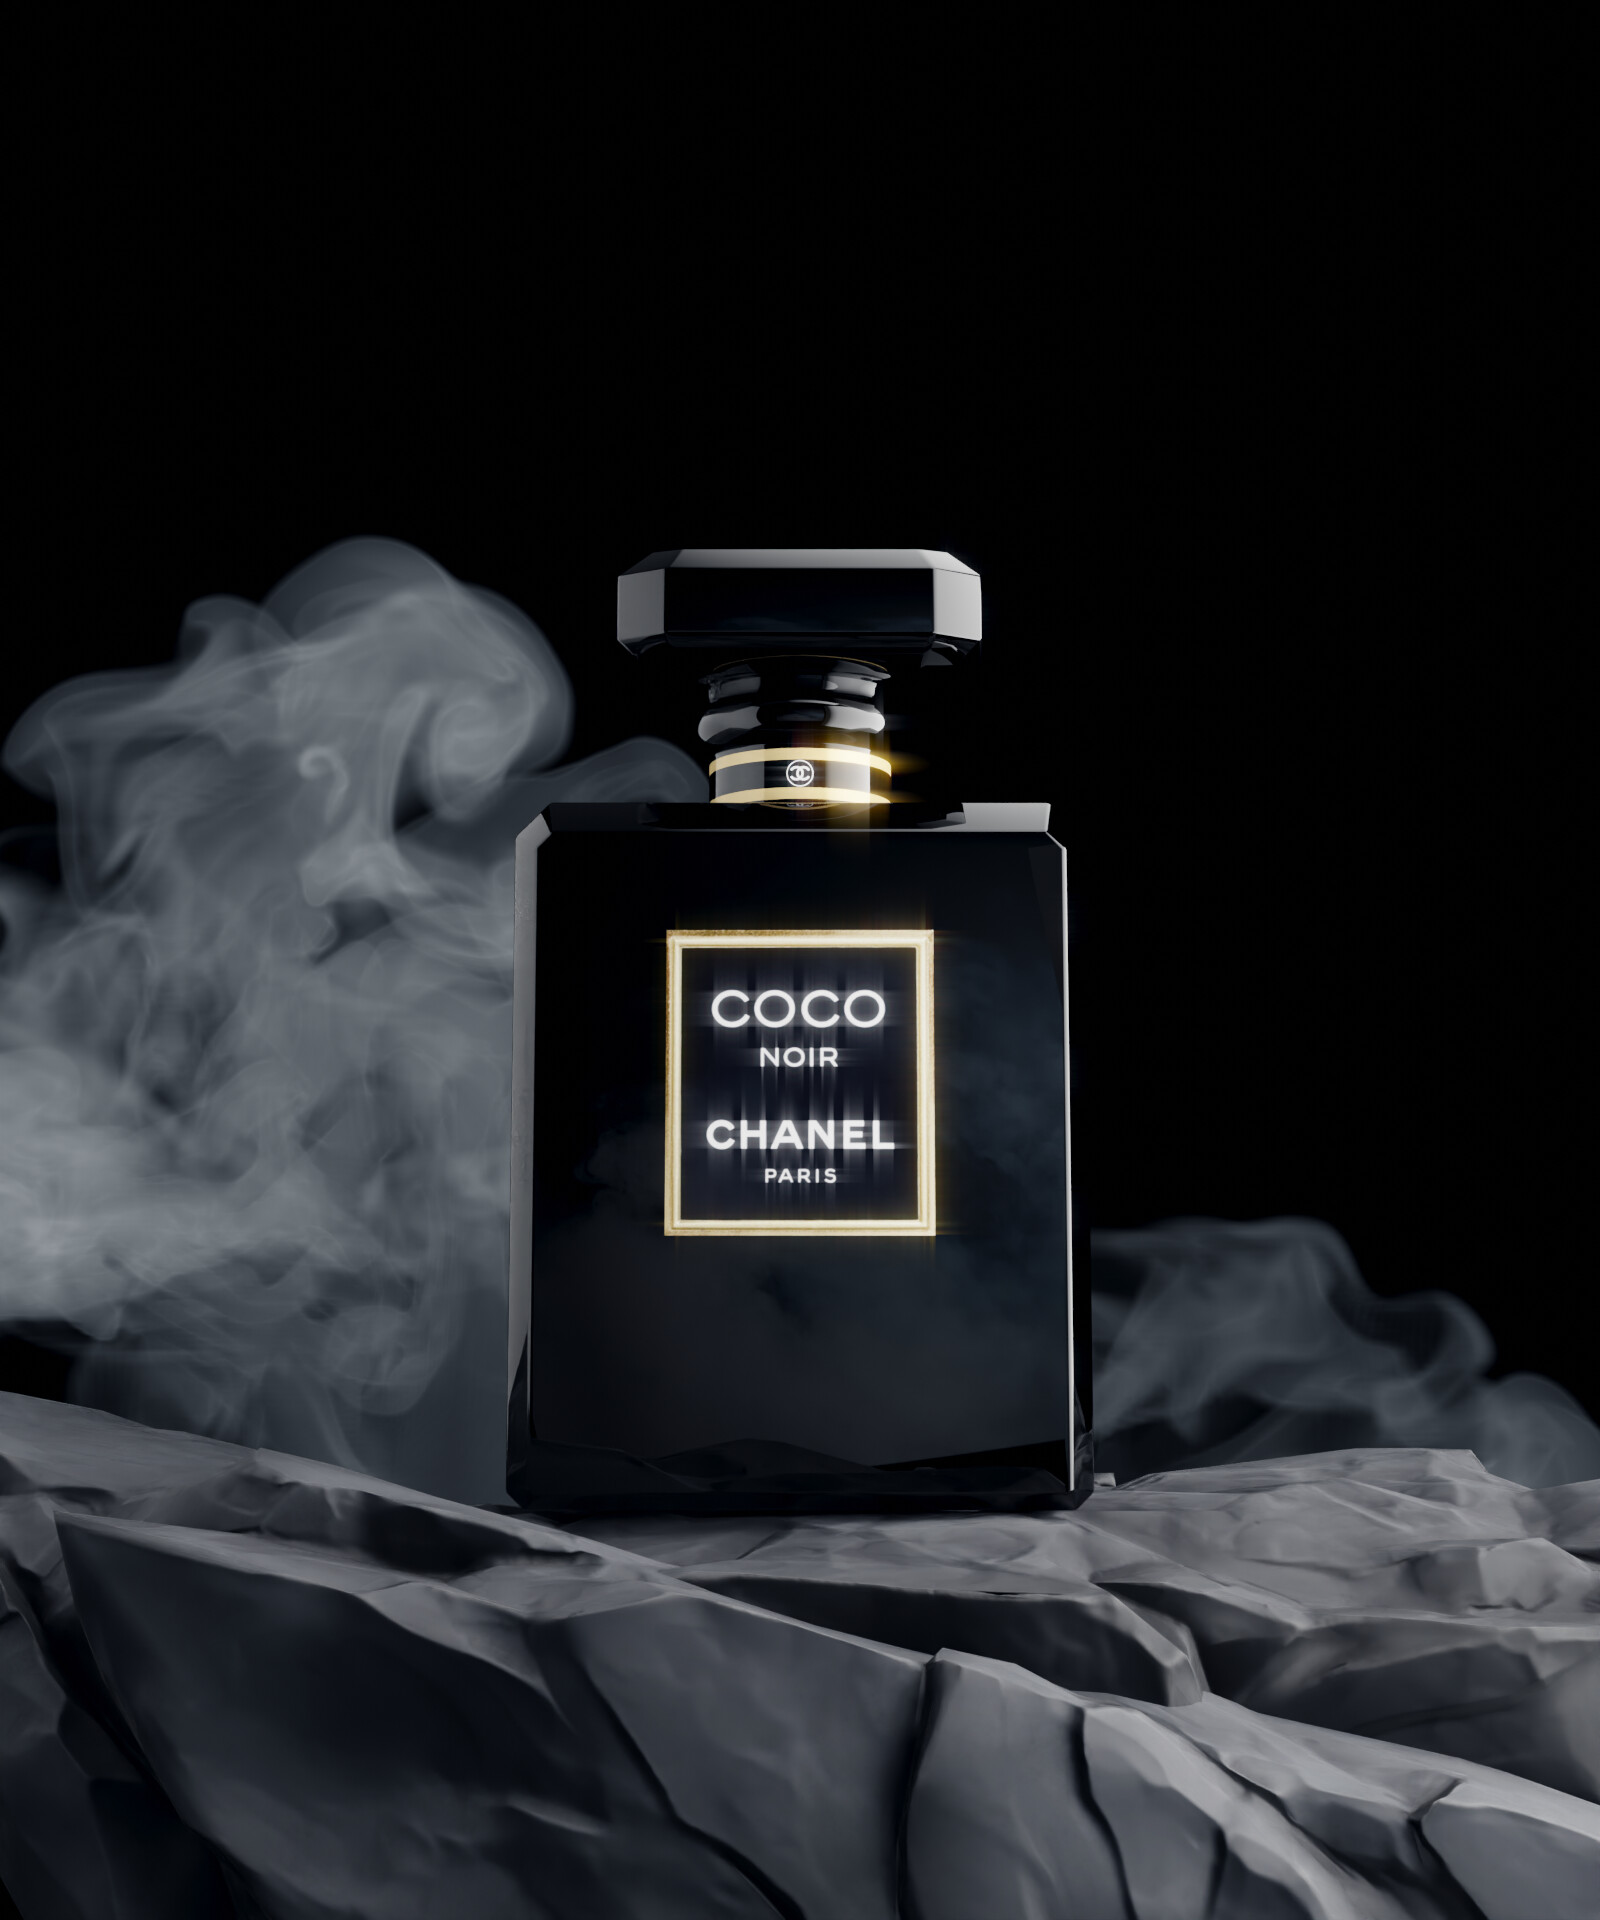 Karlie Kloss fronts campaign for Coco Noir by Chanel – New York Daily News